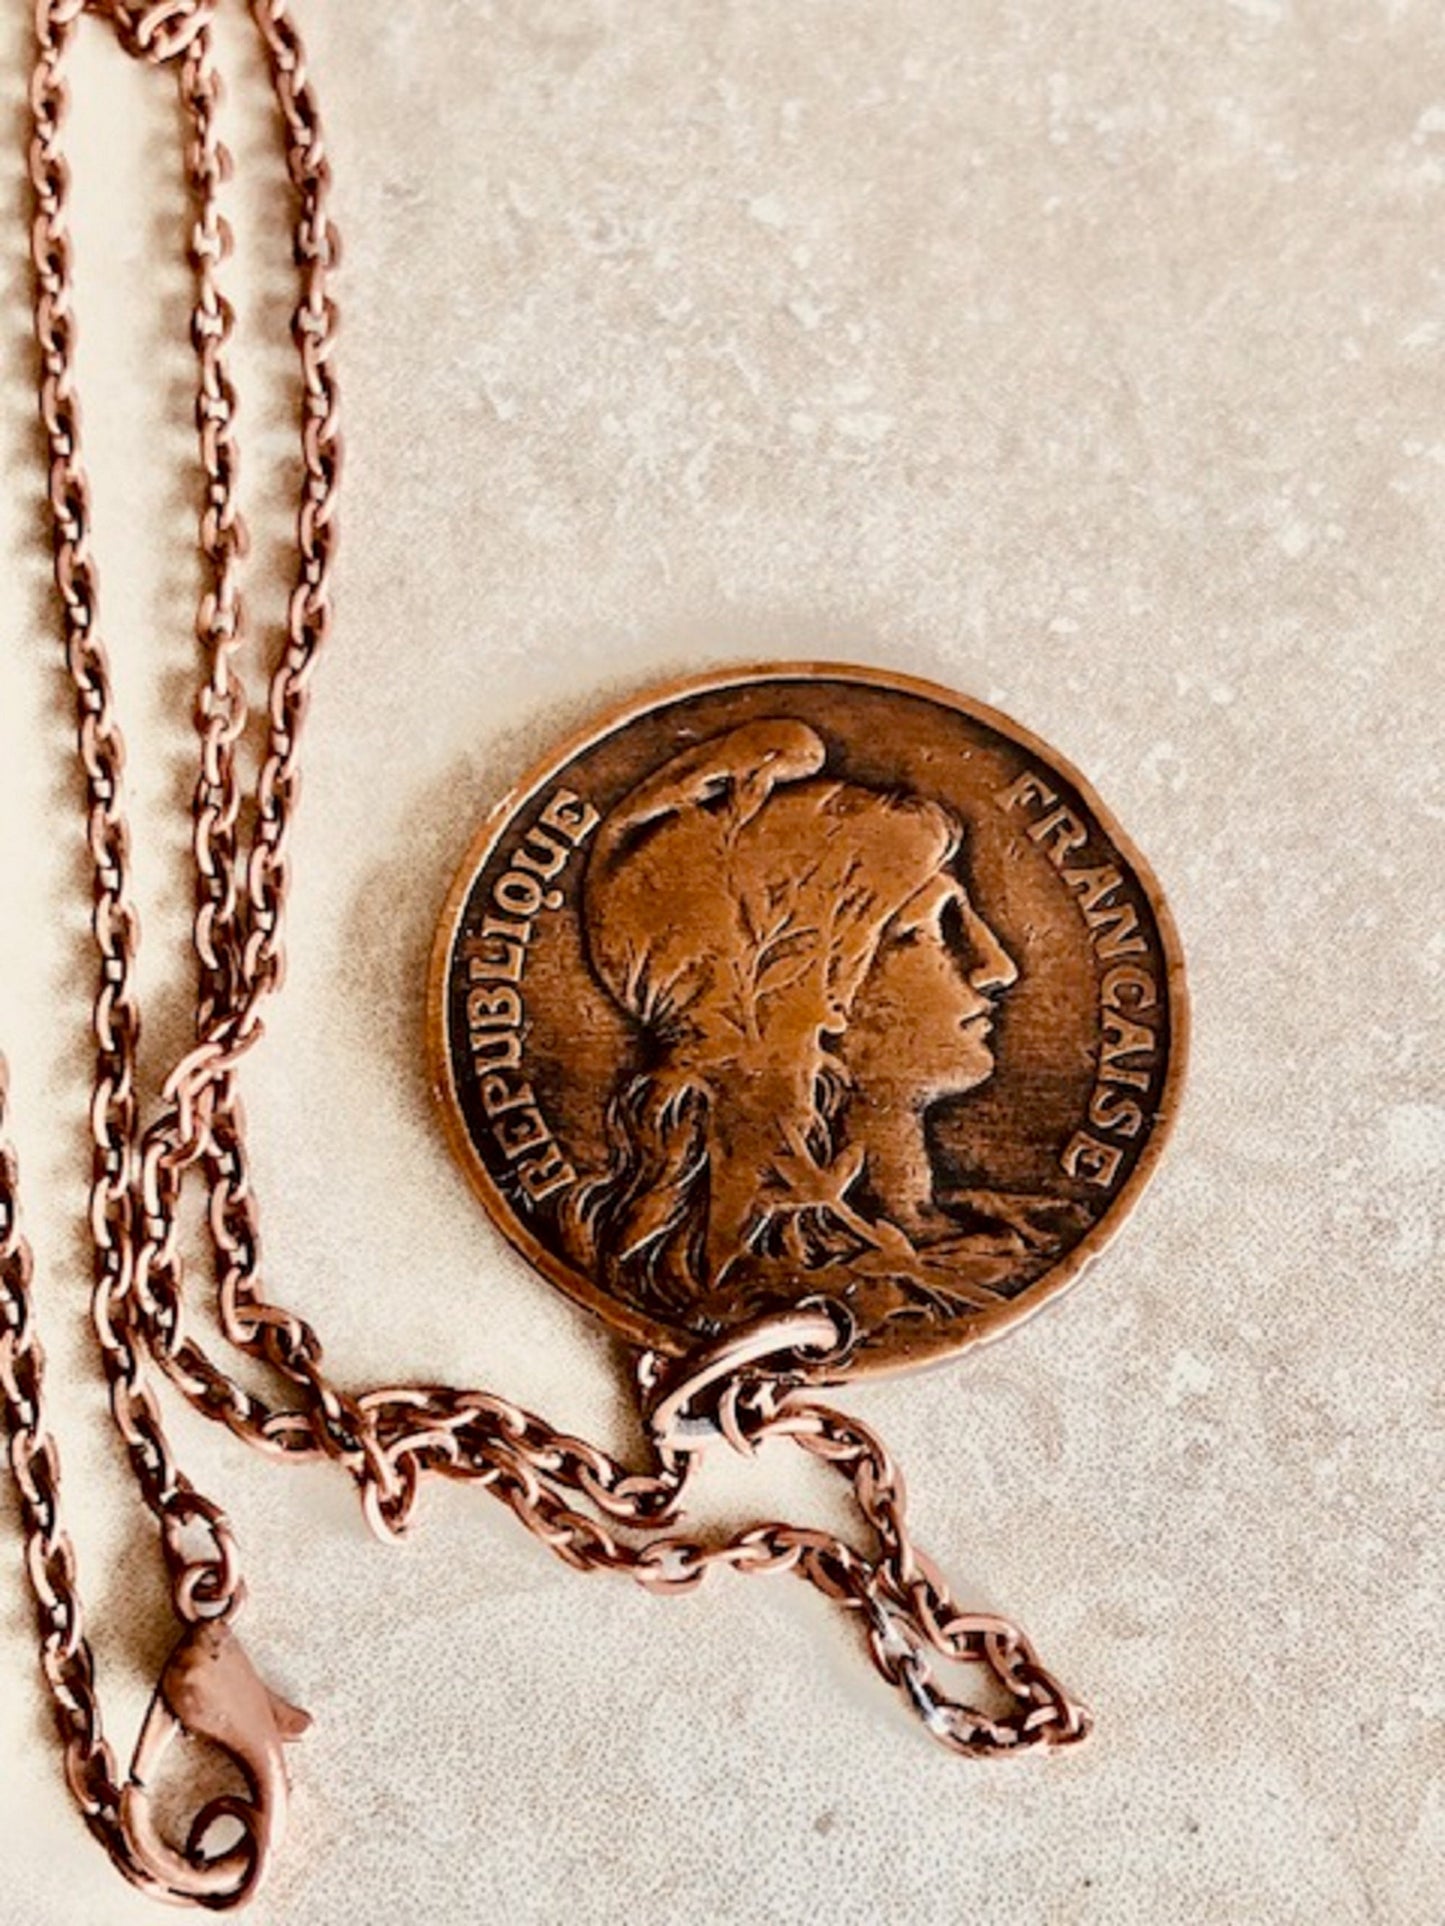 France Coin Necklace French Pendant 10 Centimes Liberty Equality Fraternity Personal Jewelry Gift Friend Charm Him Her World Coin Collector